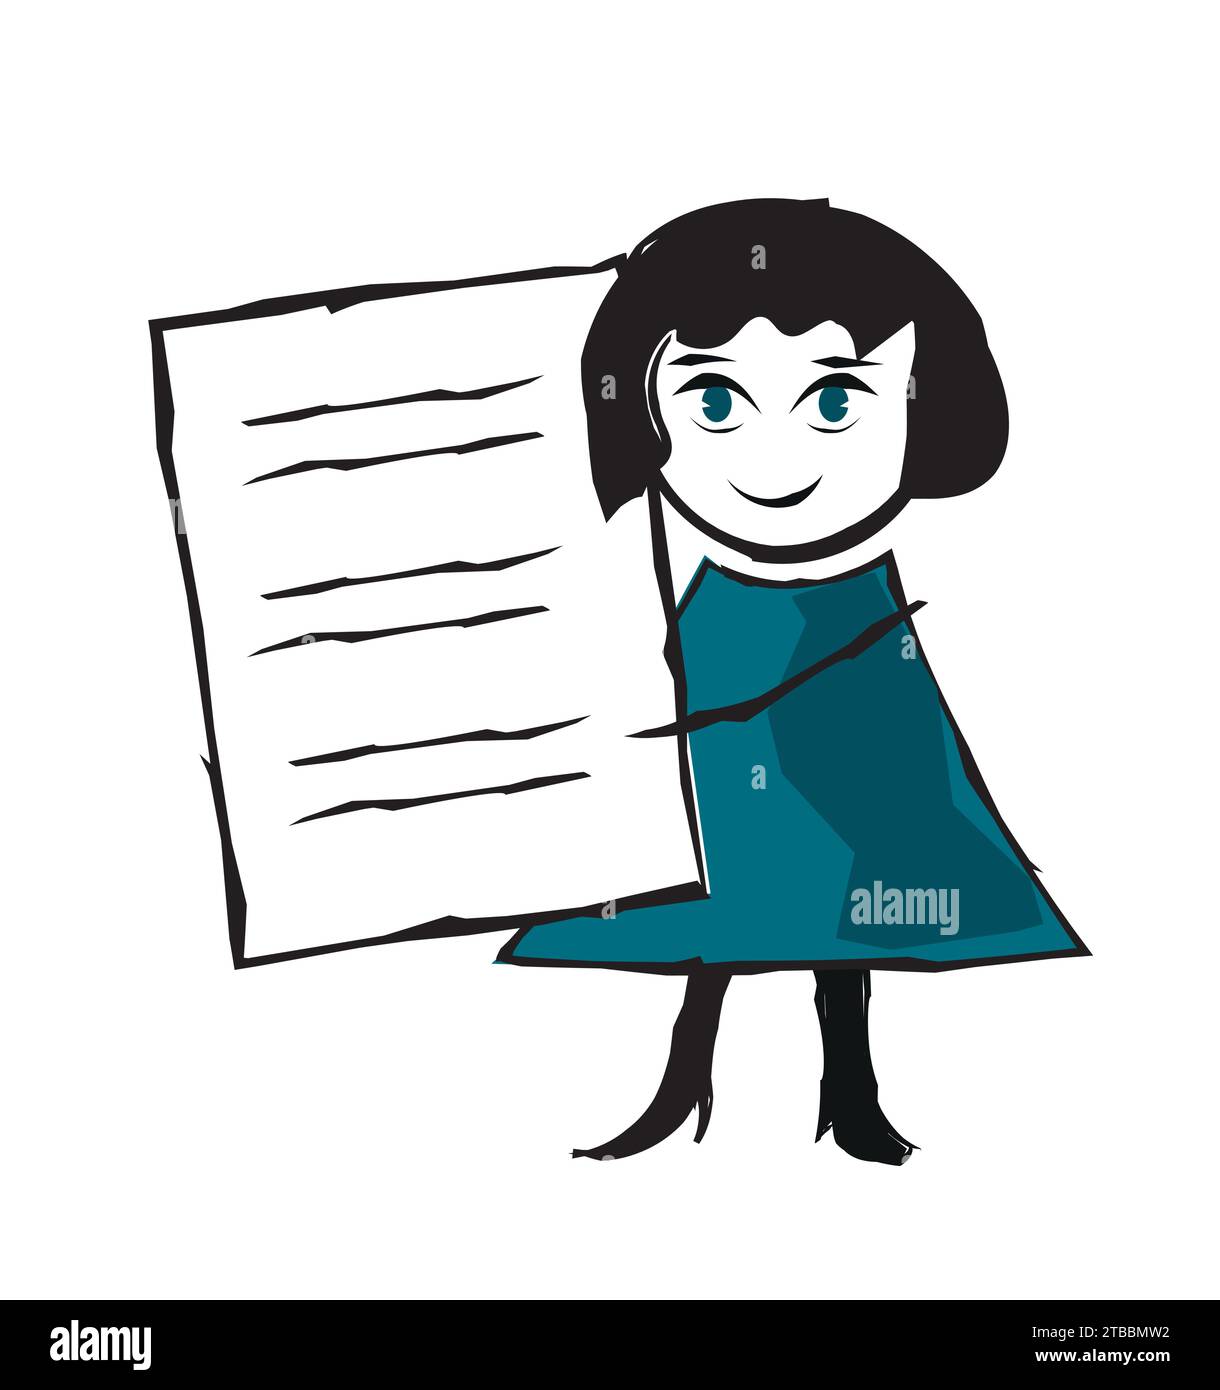 Drawn girl holds a large Board for presentation Stock Vector